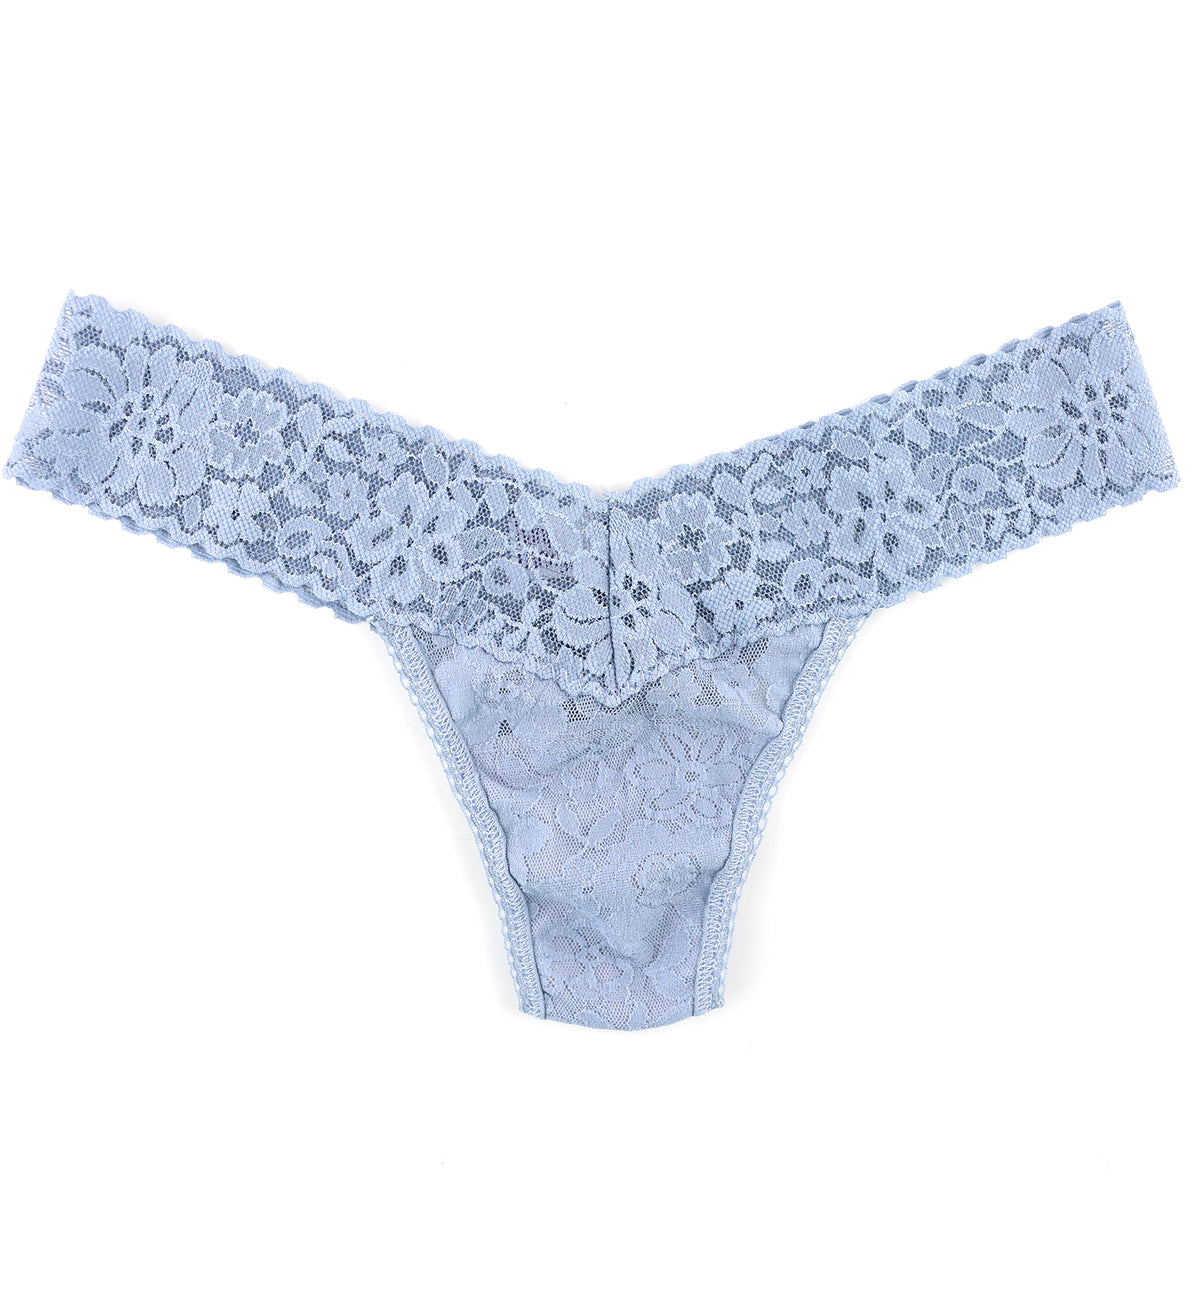 Hanky Panky Daily Lace Low Rise Thong (771001P),Grey Mist - Grey Mist,One Size